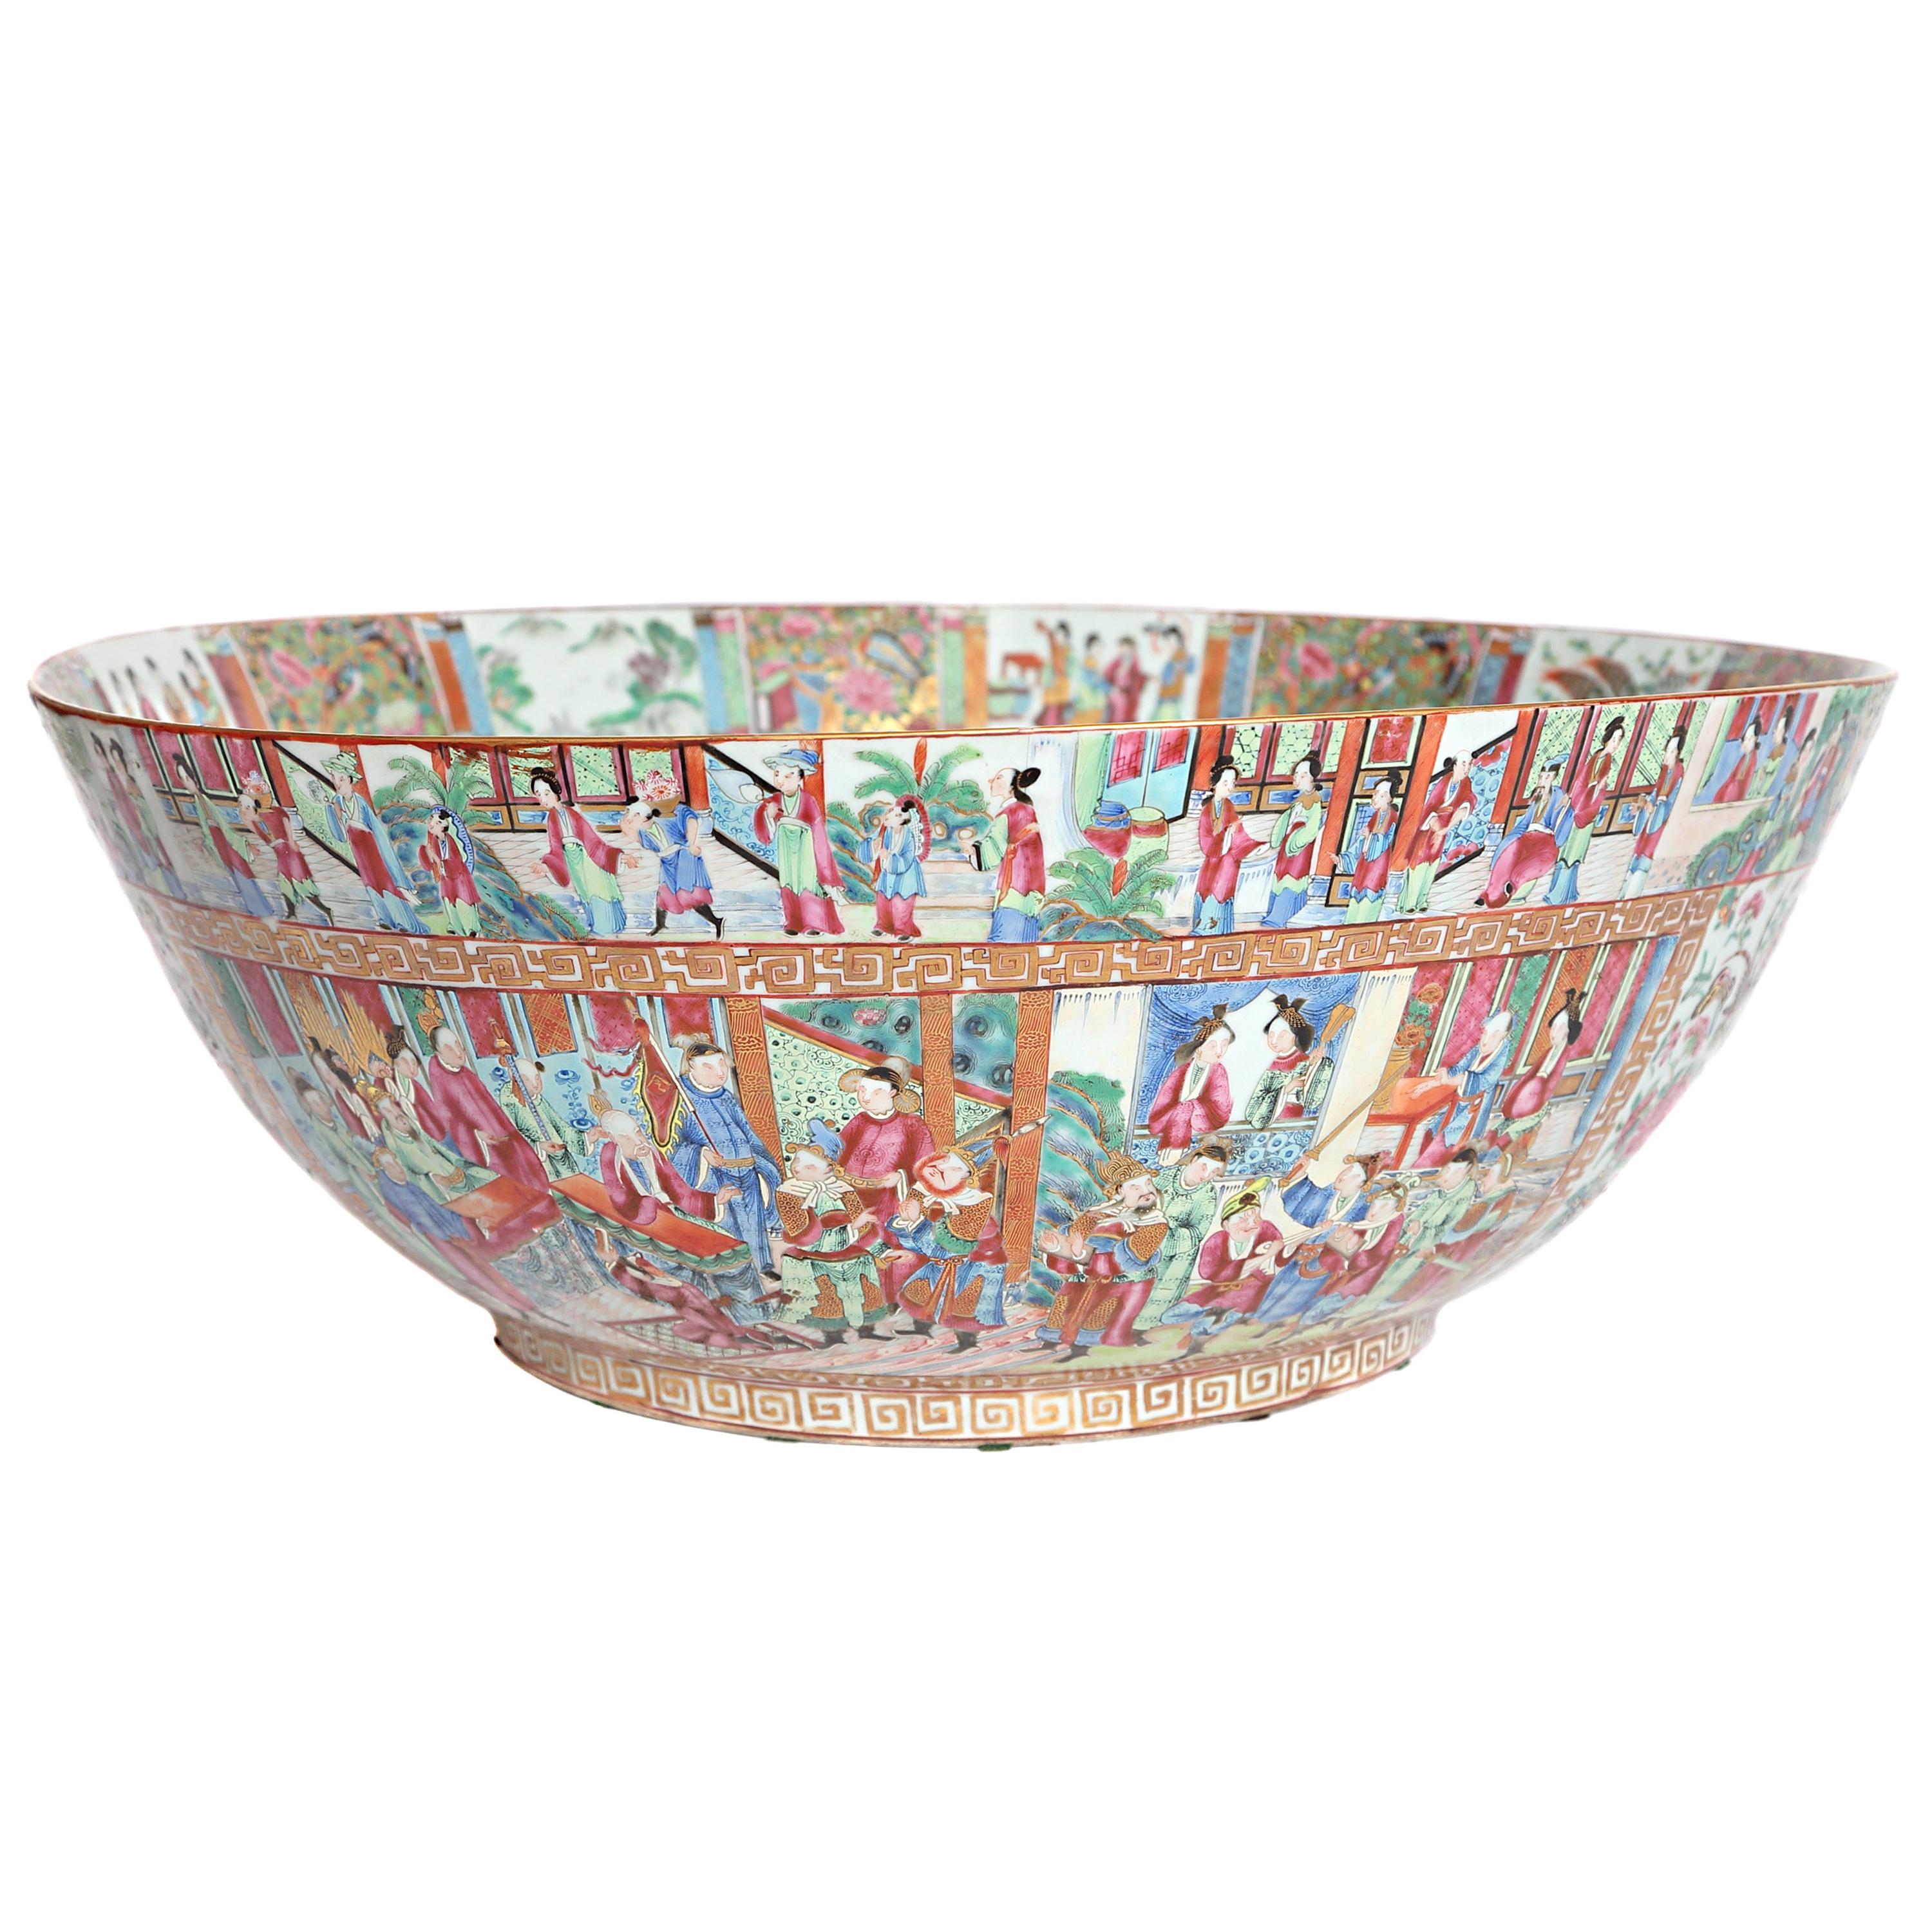 Large Scale Punch Bowl / Chinese Export Rose Medallion